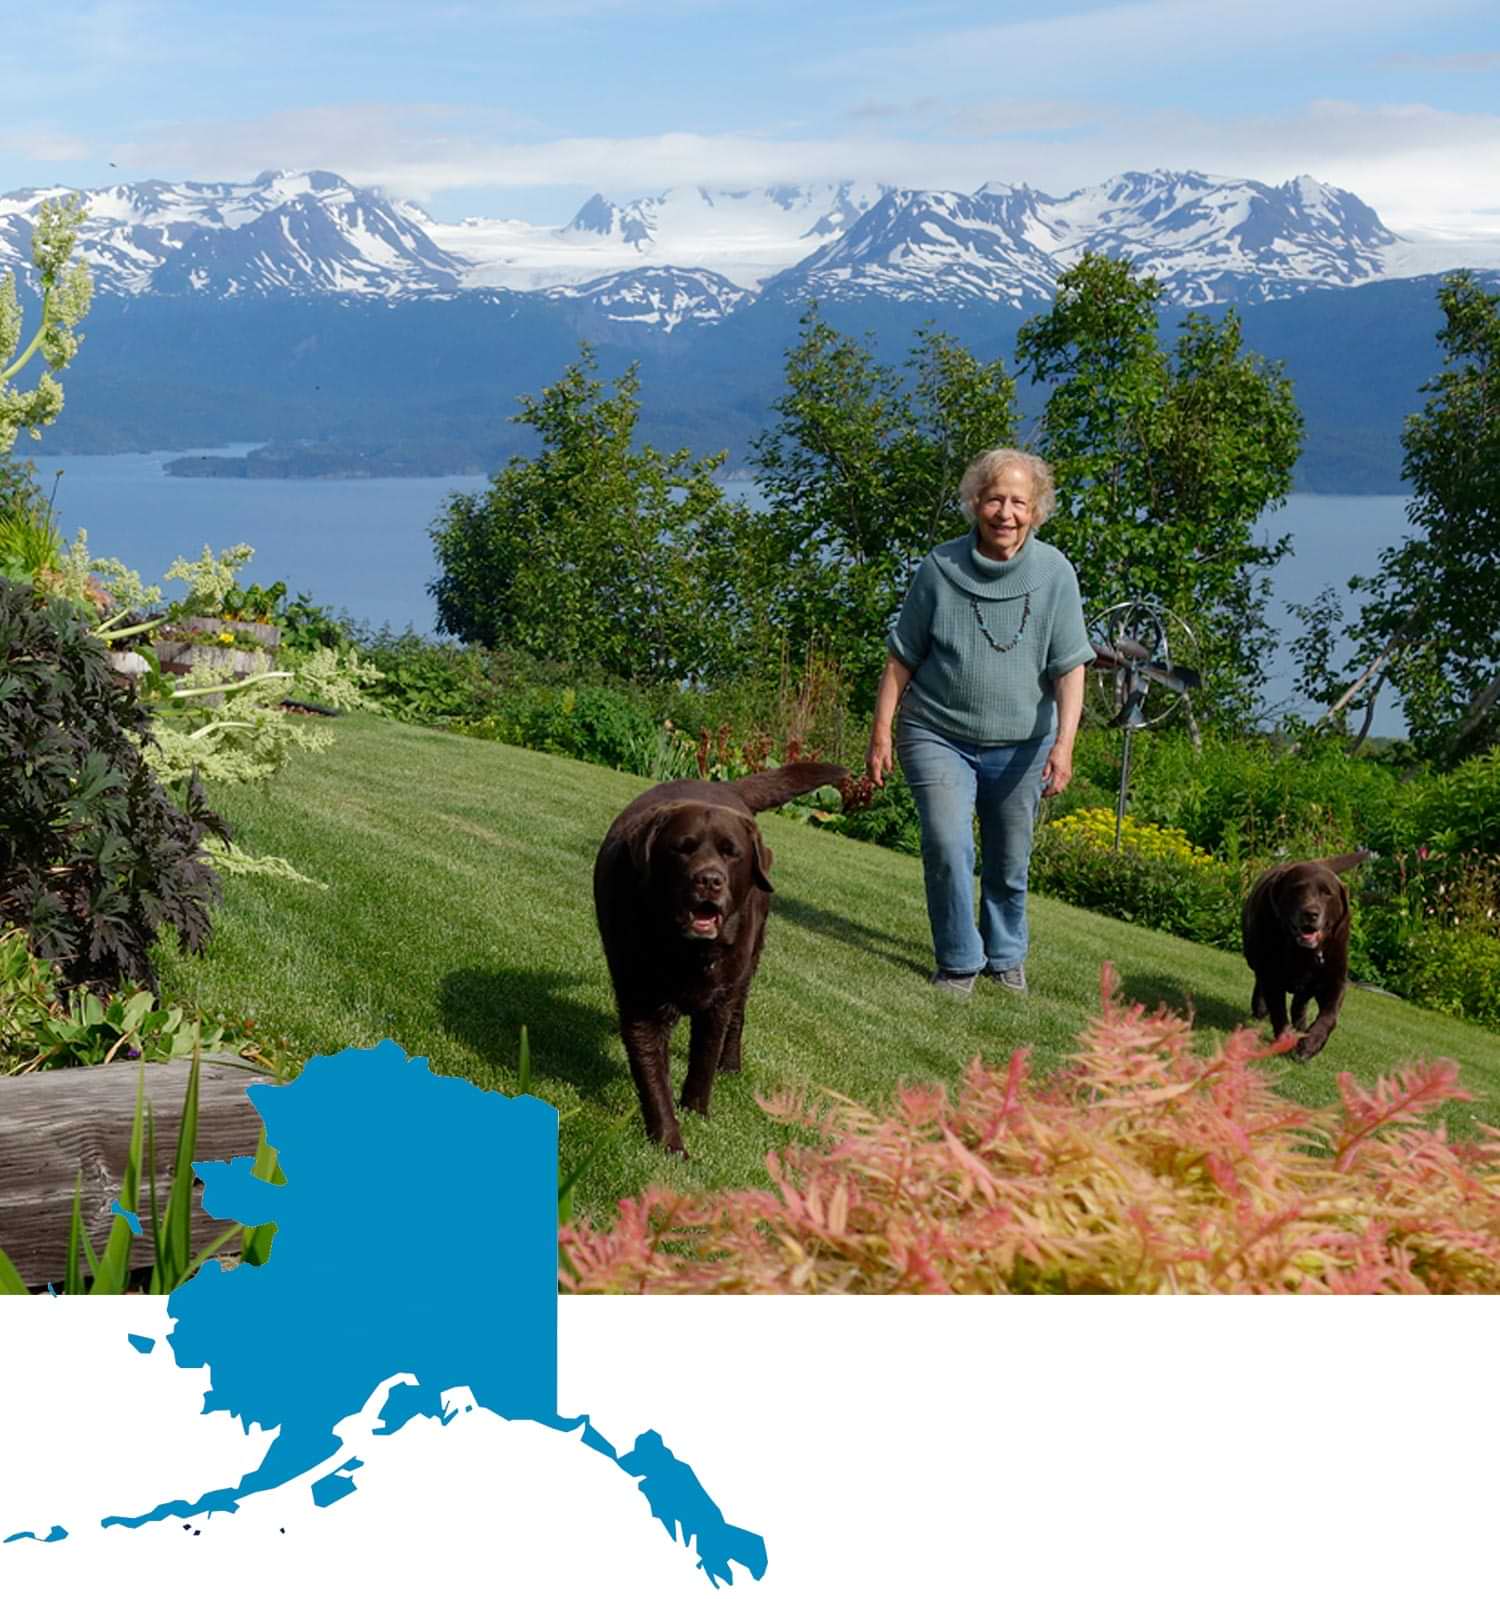 Brenda Crouthamel Adams and her dogs at her home in Alaska